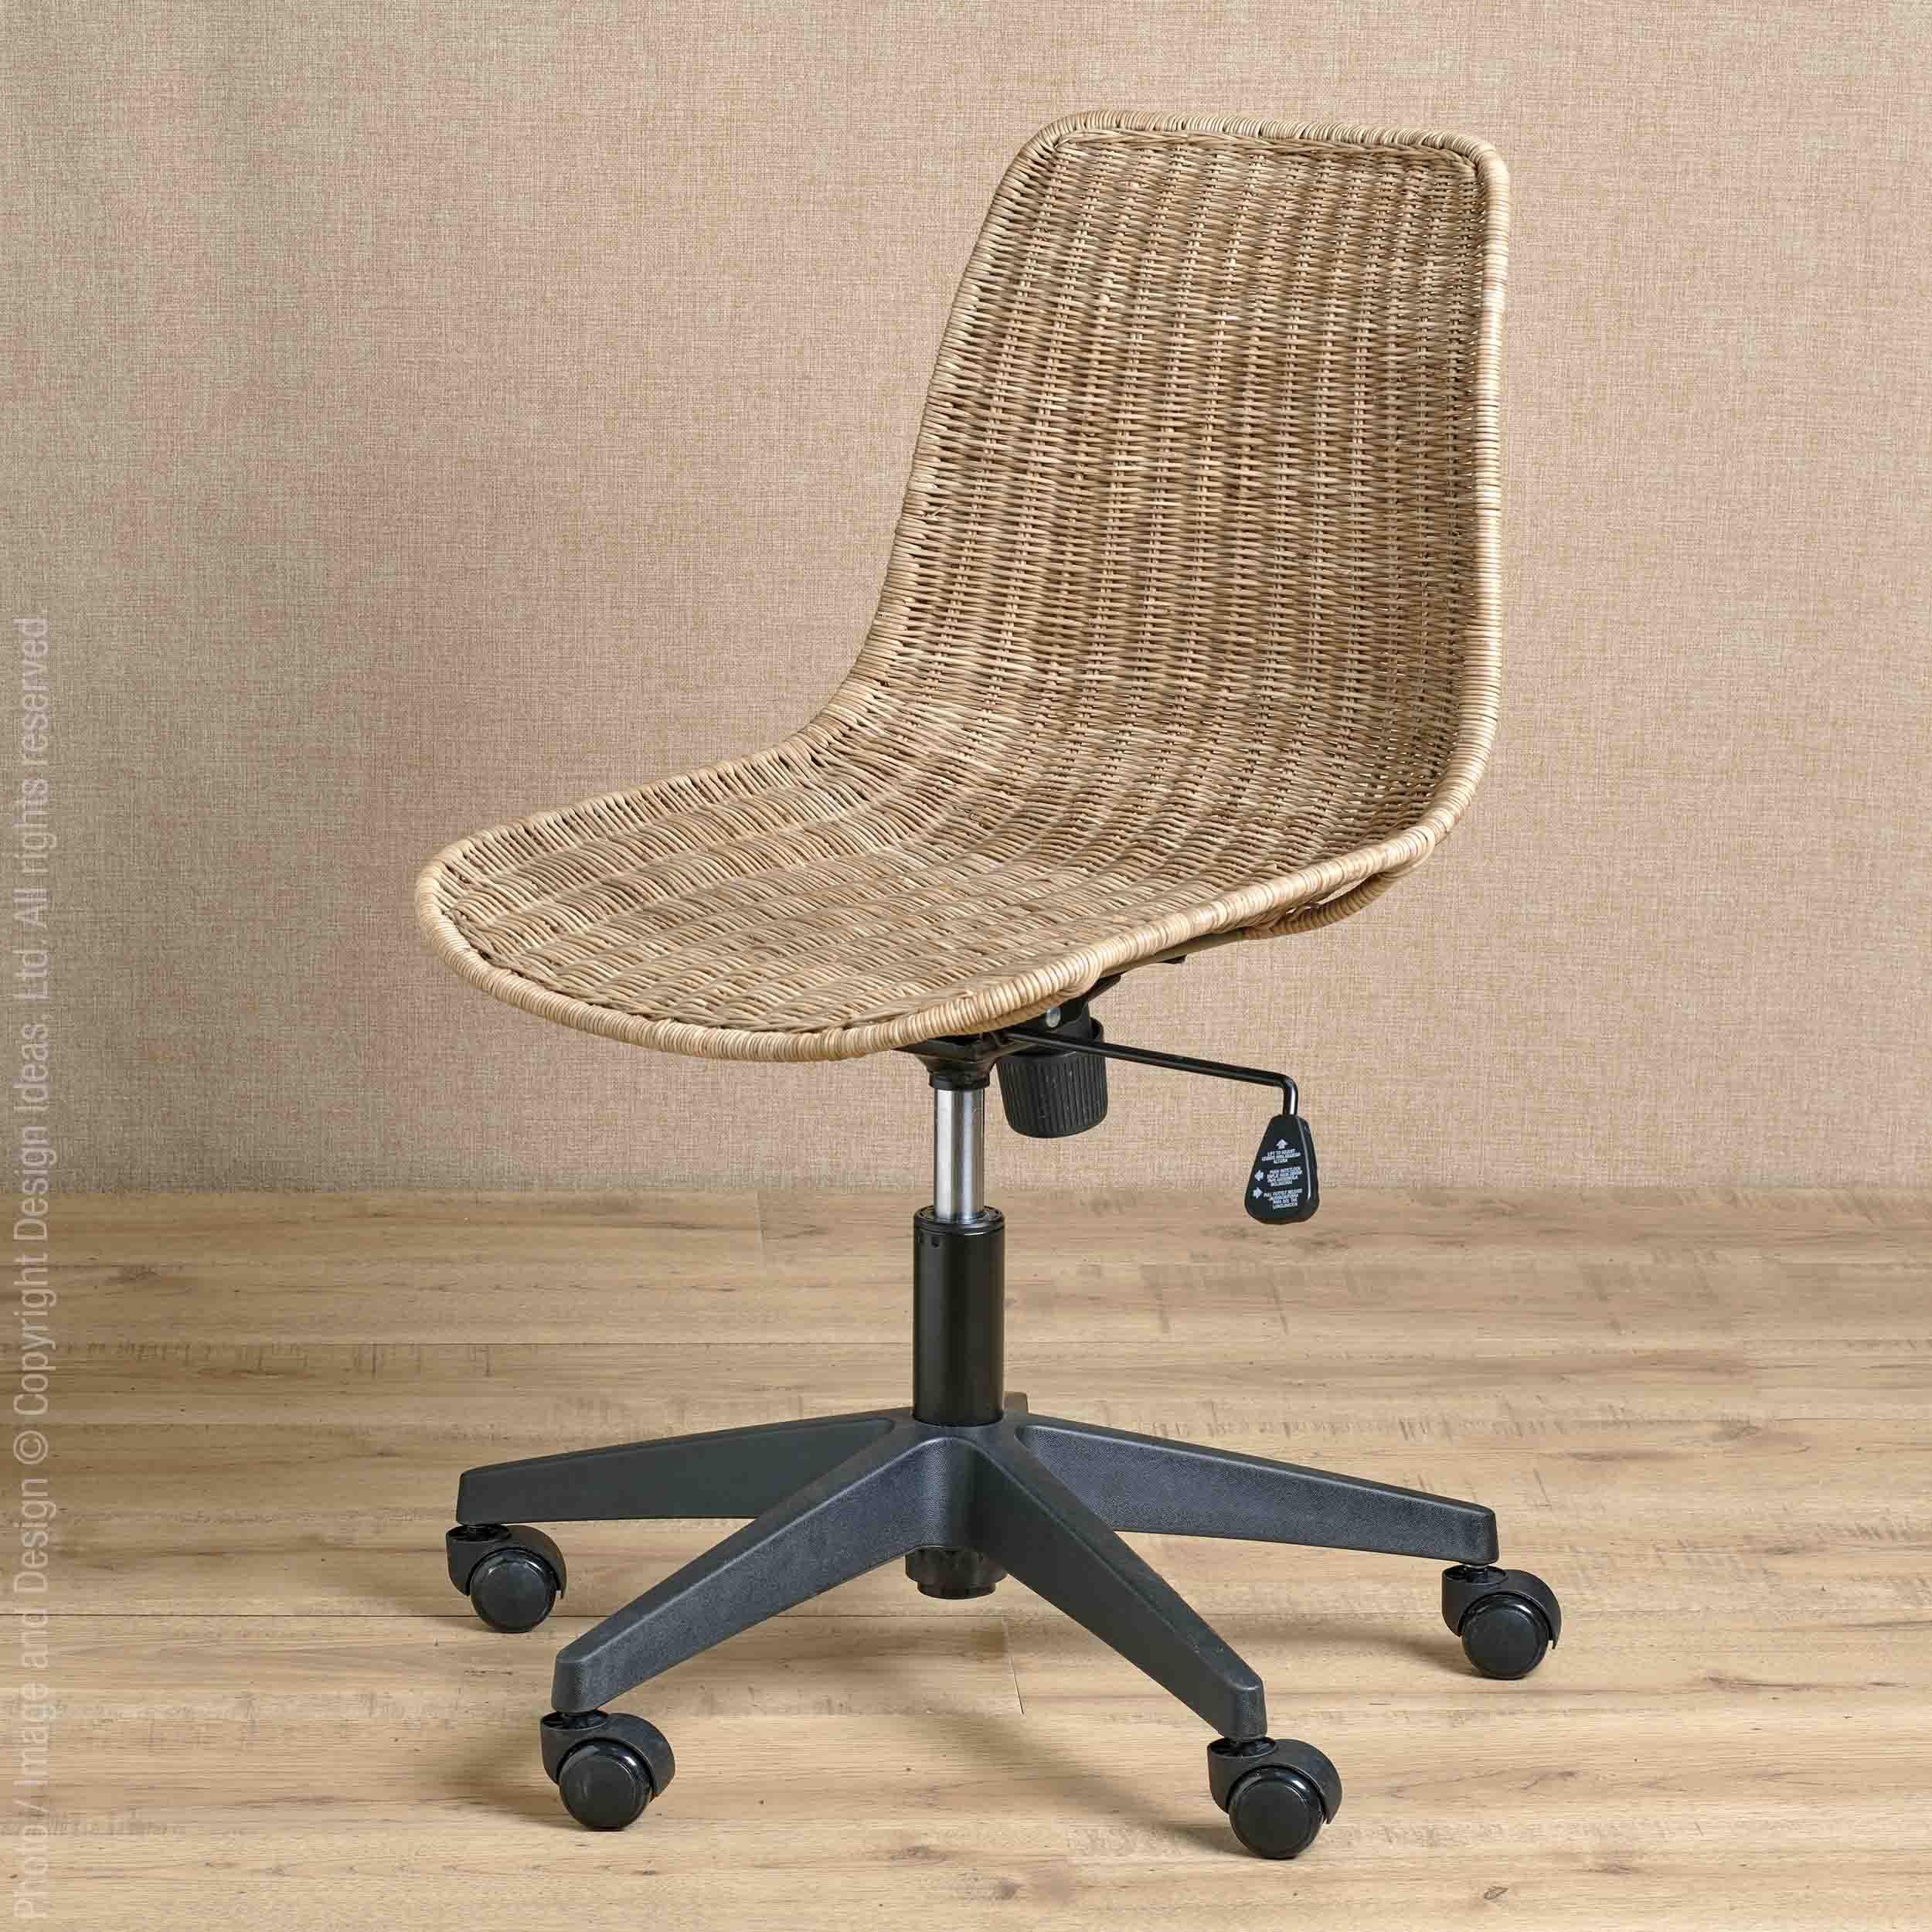 Ormond™ task chair - Natural | Image 1 | Premium Chair from the Ormond collection | made with Slimit, plastic, casters for long lasting use | texxture